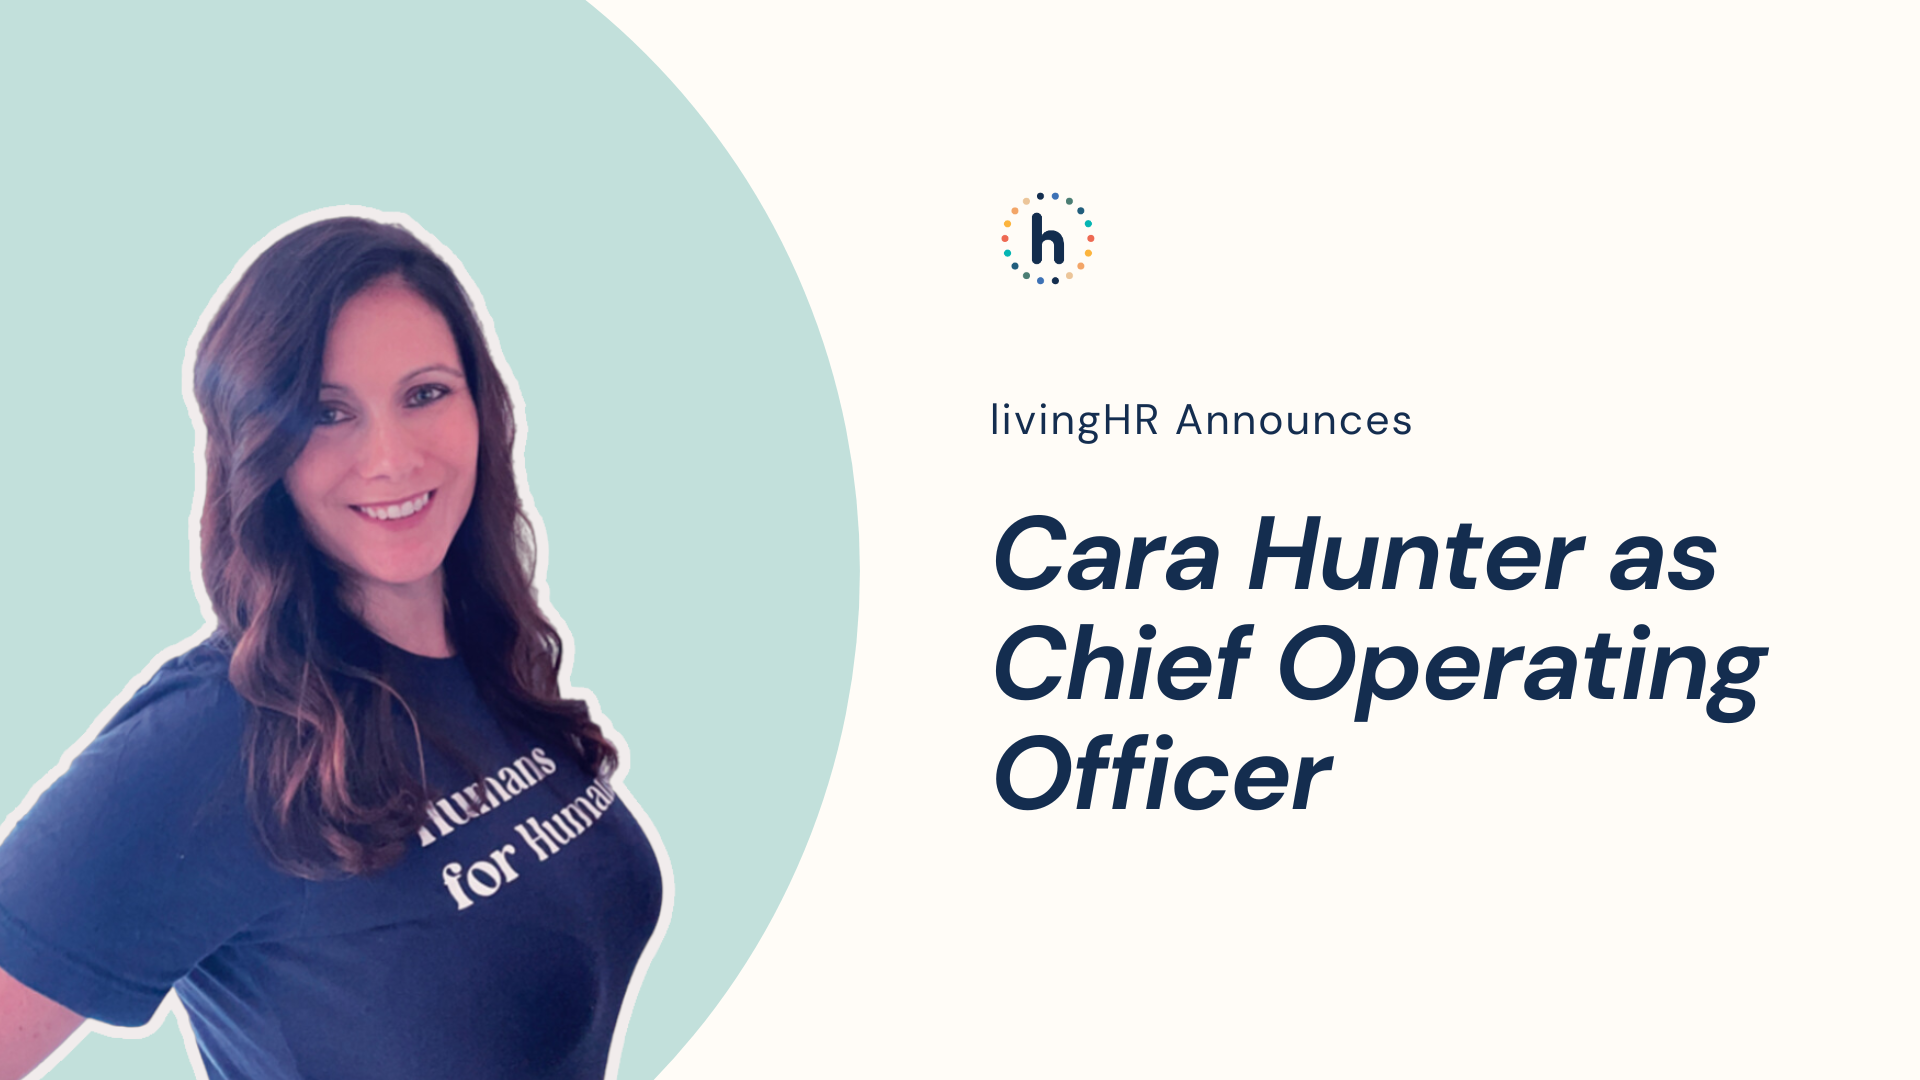 livingHR Announces Cara Hunter as Chief Operating Officer